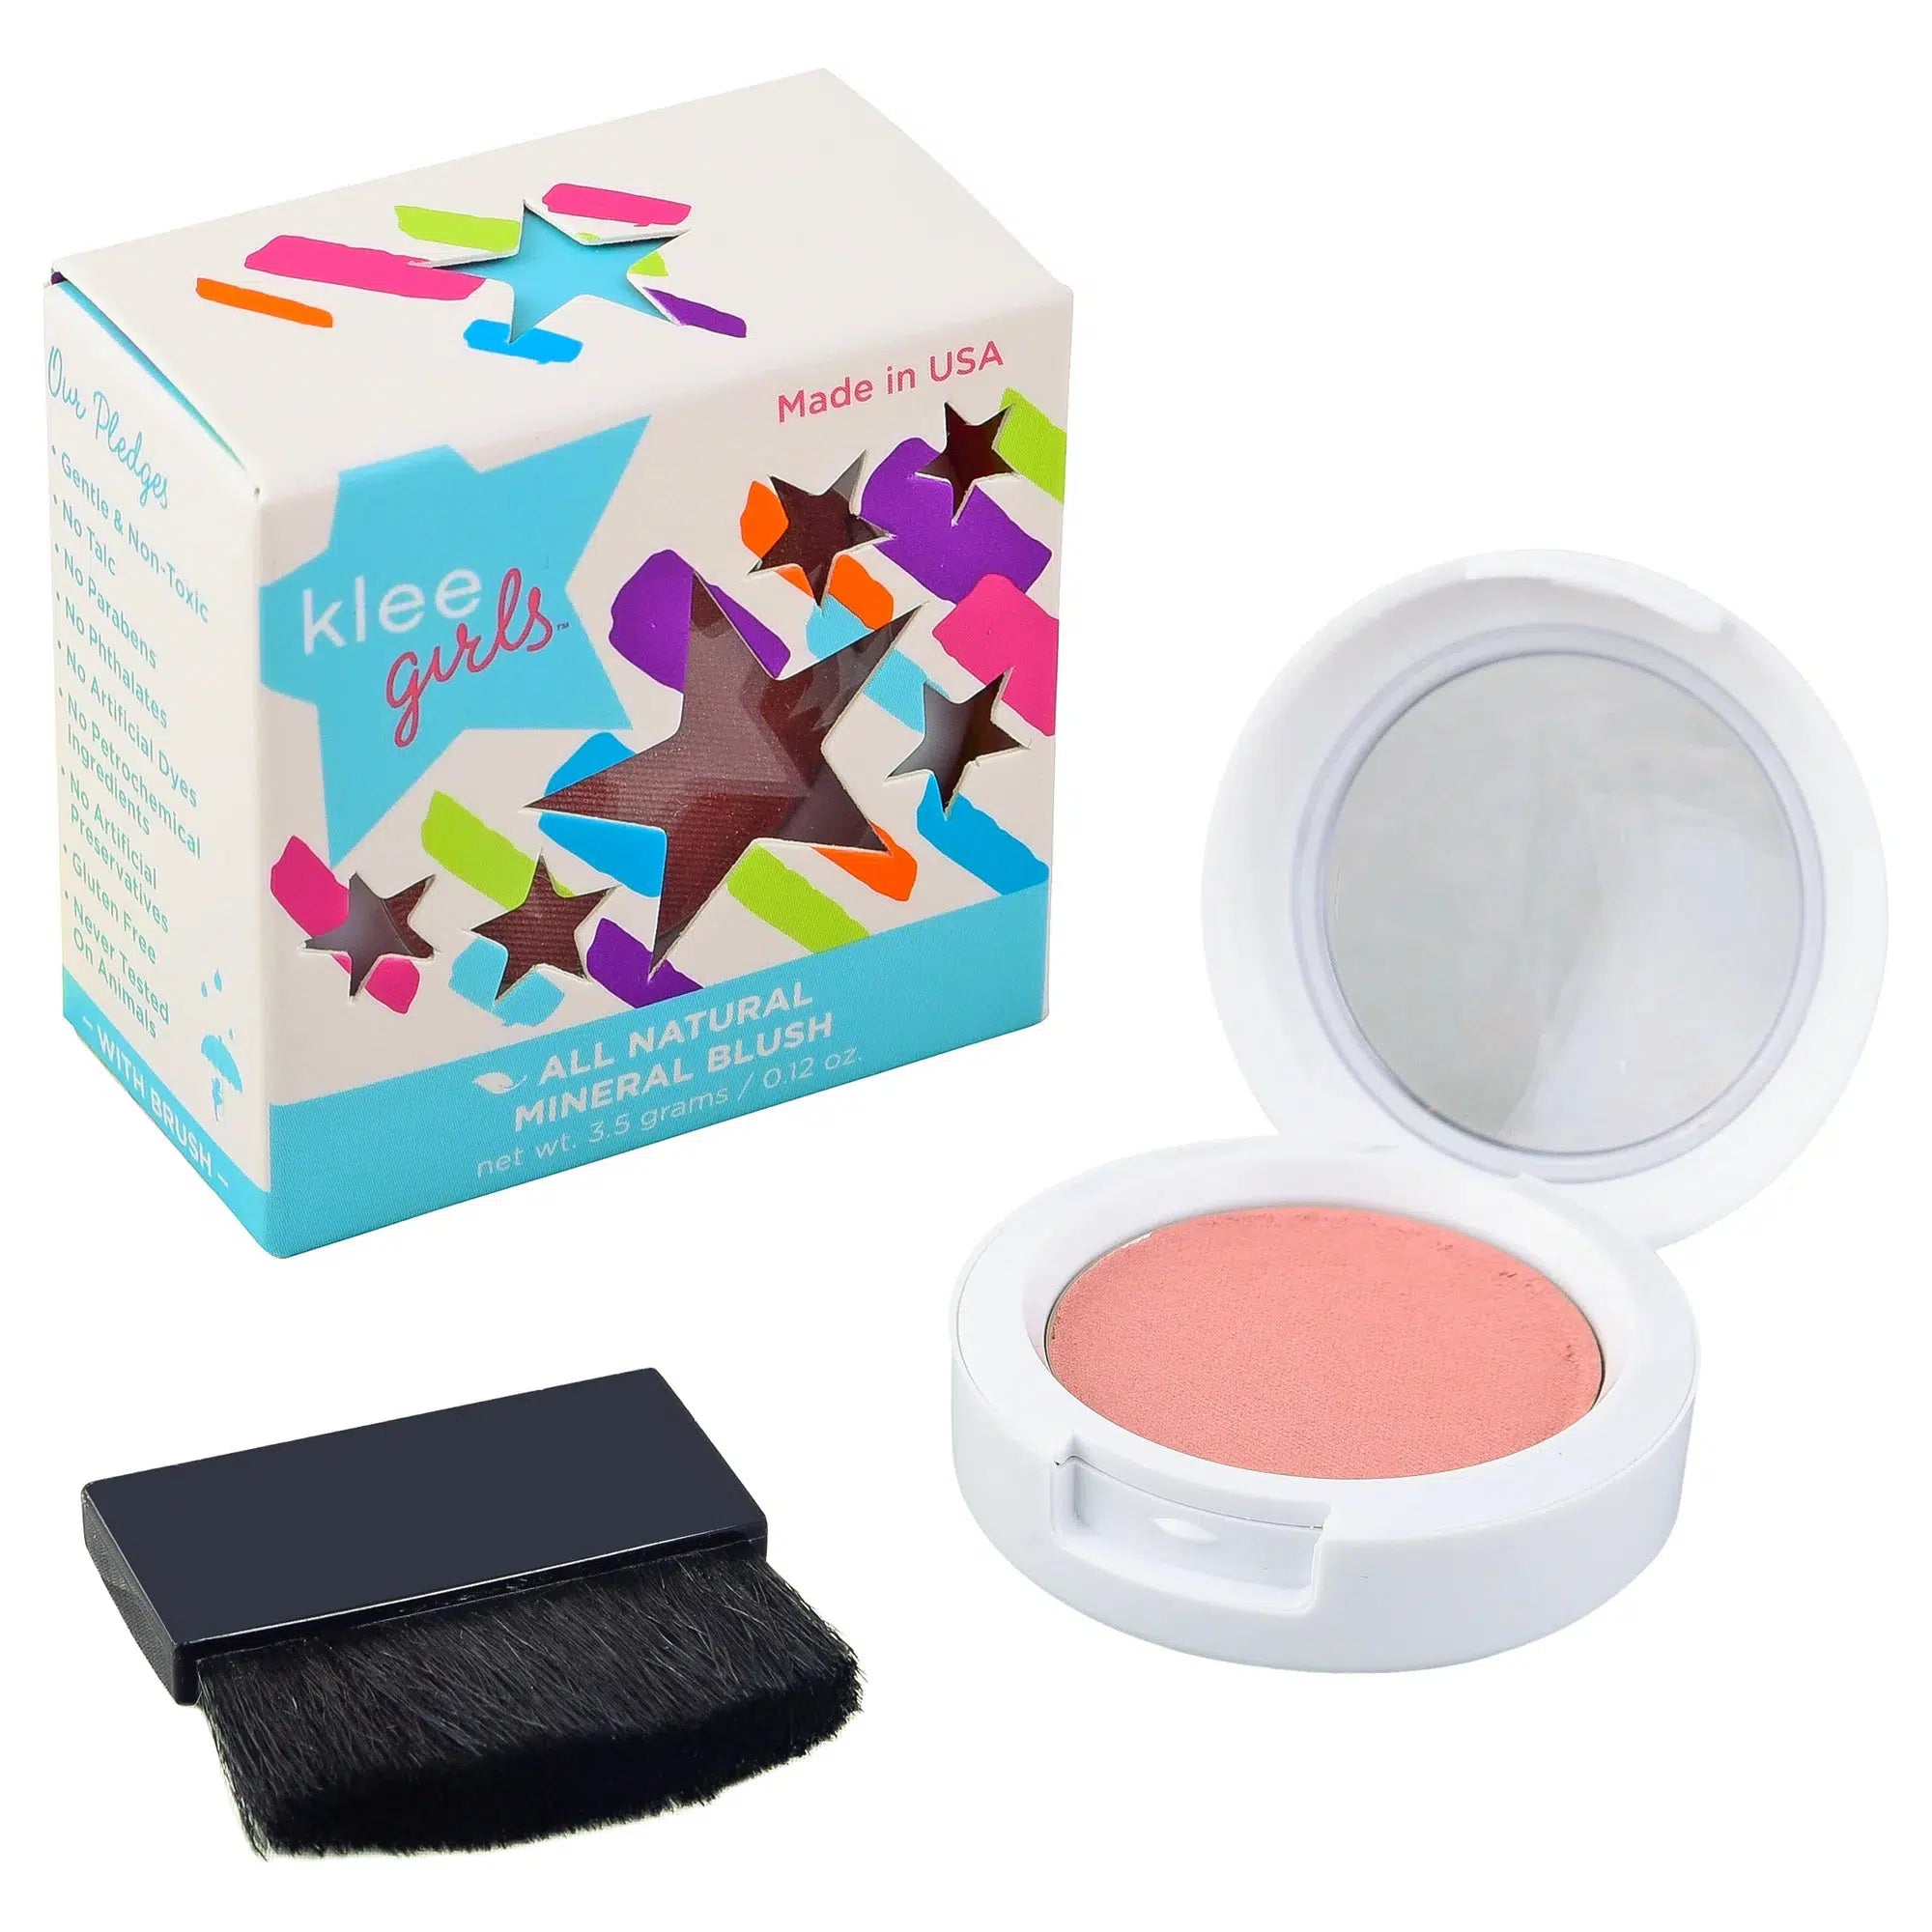 Front view of All Natural Blush-Carmel Shine in its package.